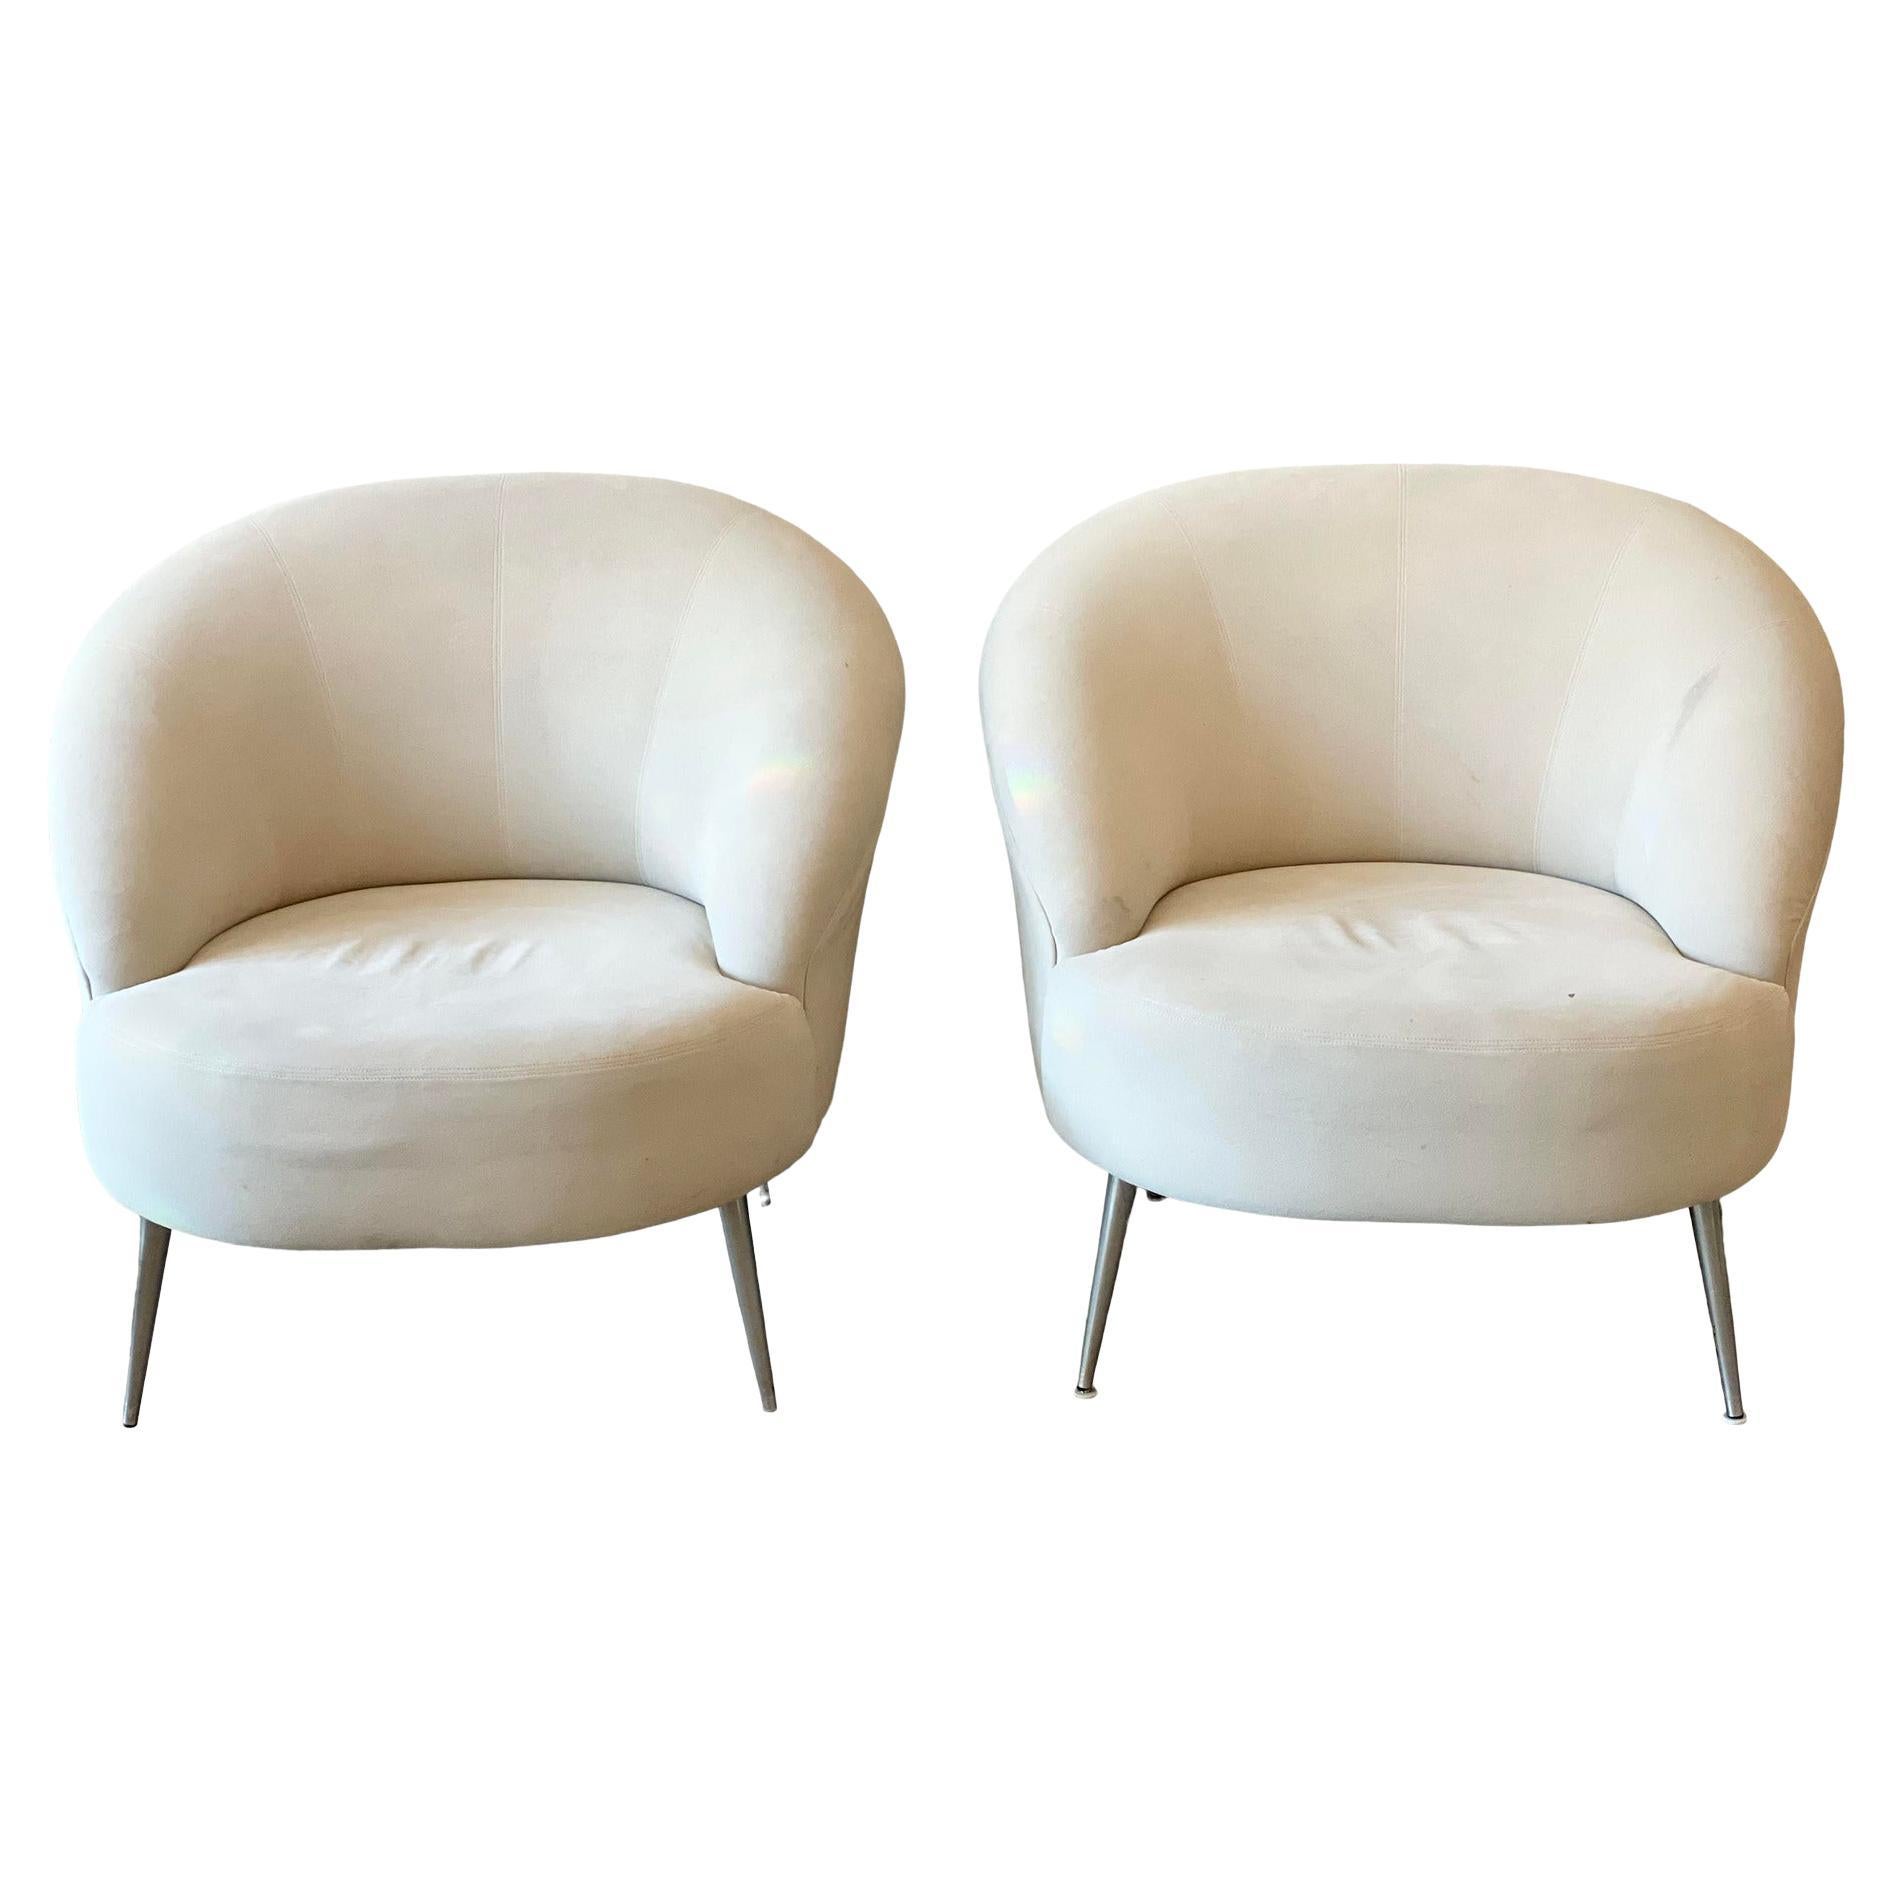 Oversized Postmodern Directional Lounge Chairs, a Pair For Sale